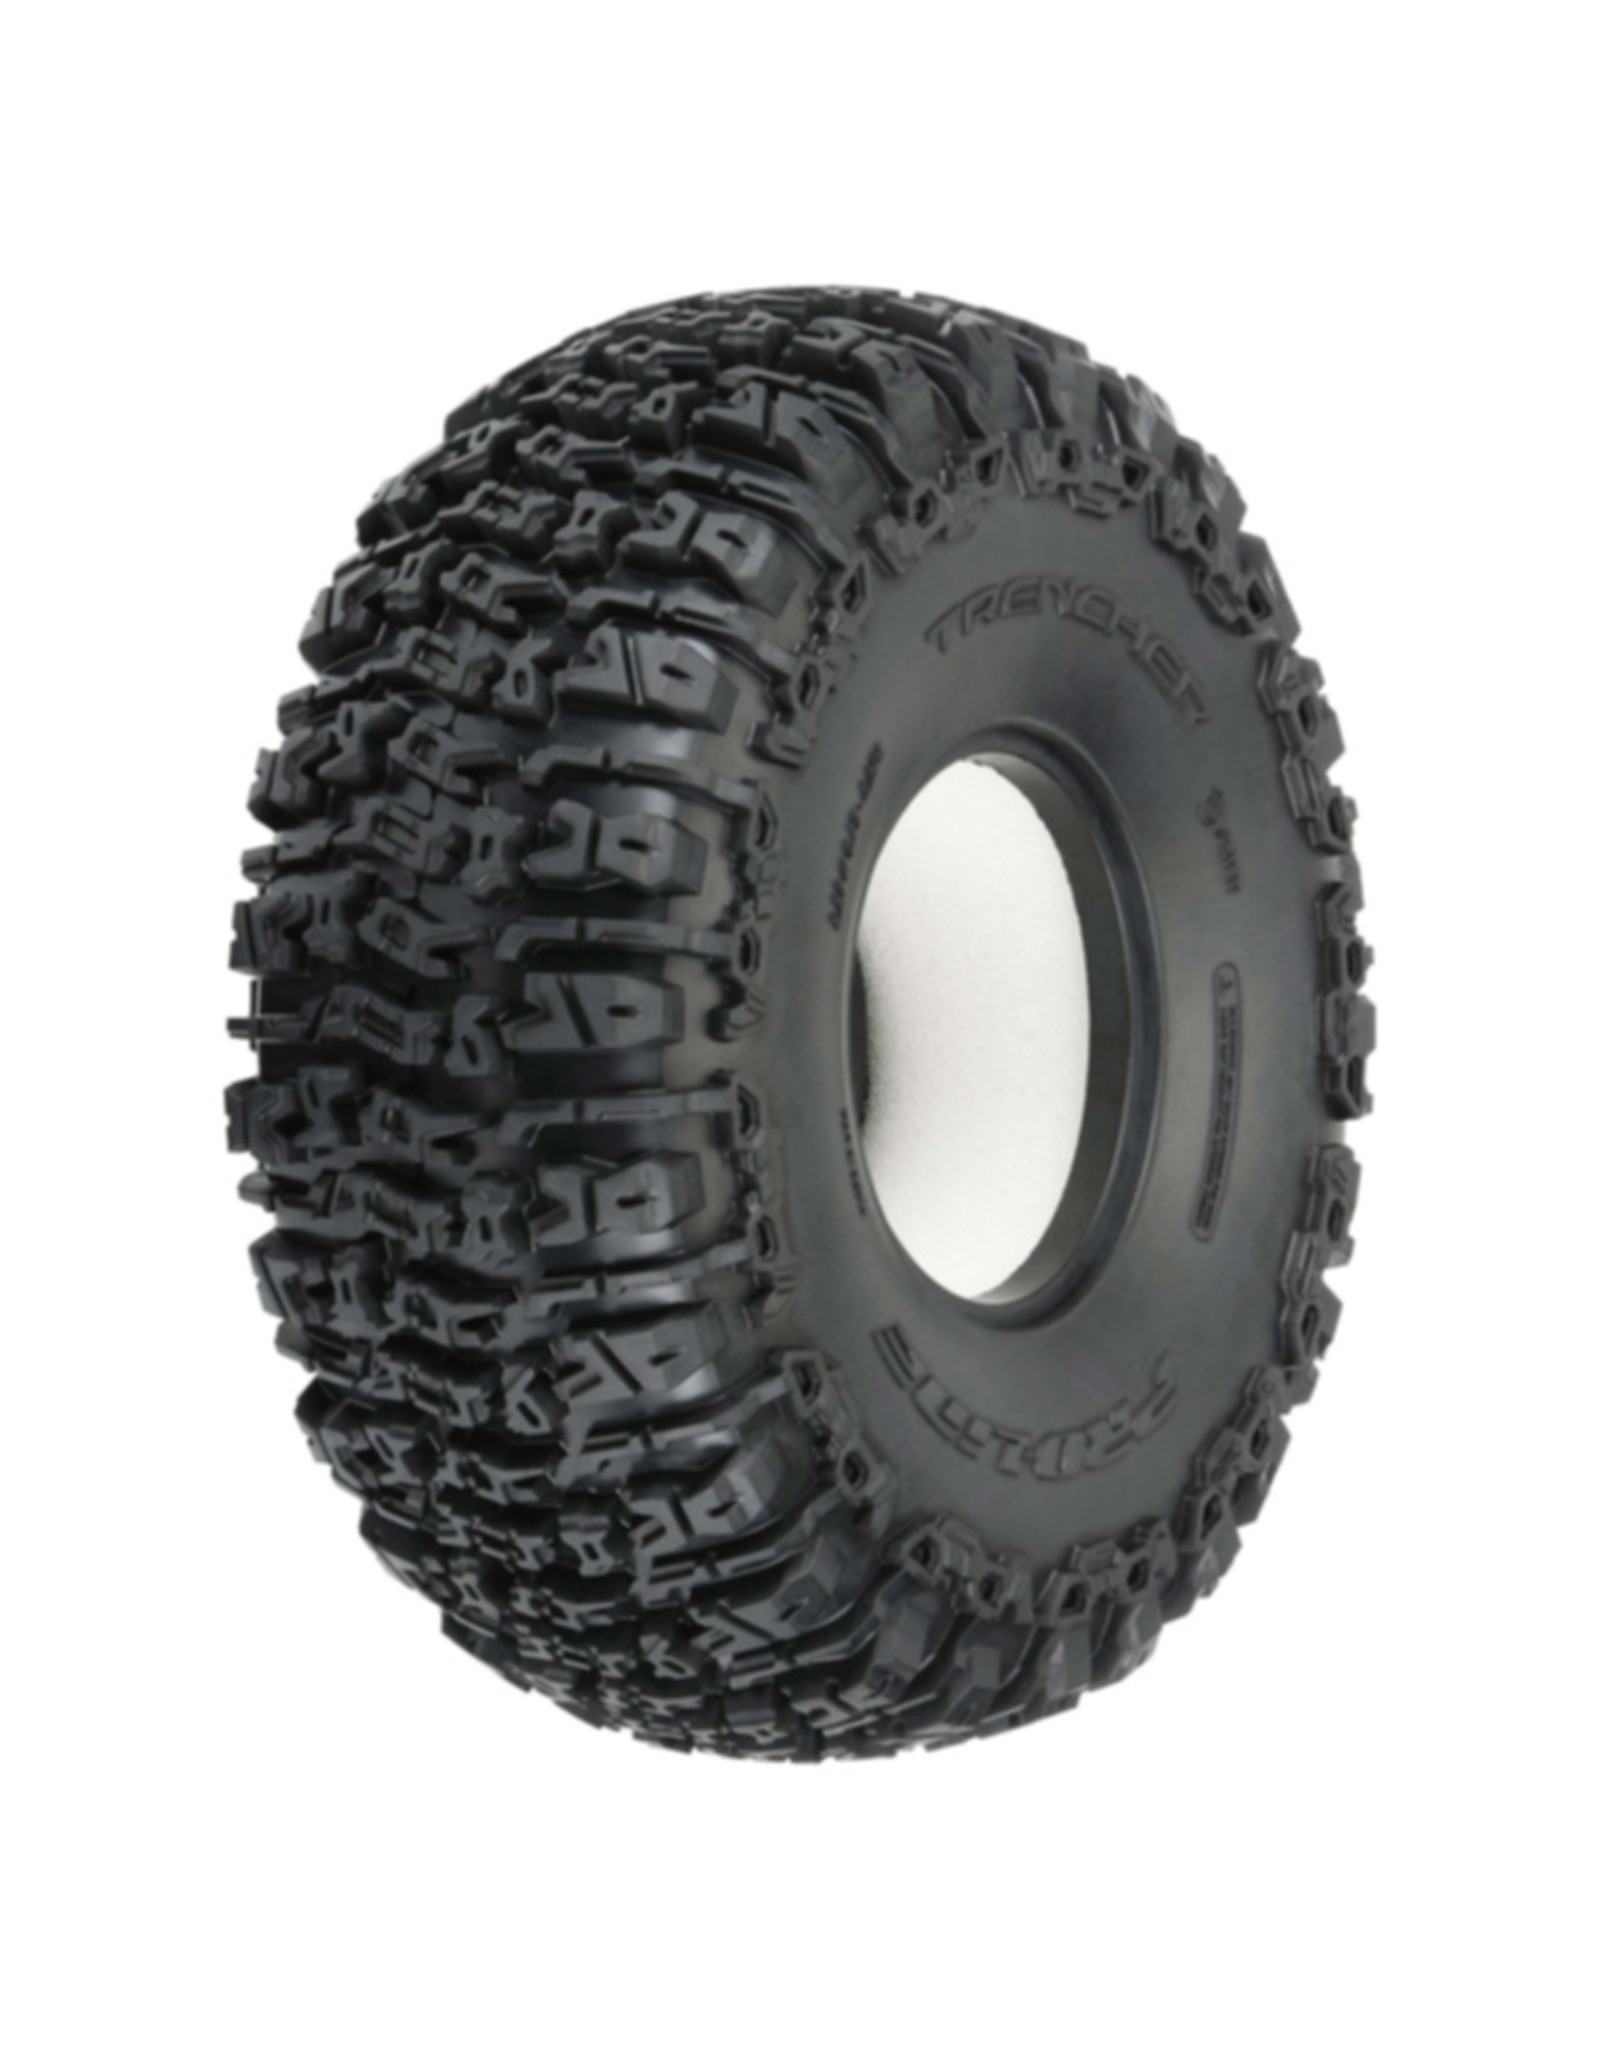 Pro-Line Racing PRO1019103 1/10 Trencher Predator Front/Rear 2.2" Rock Crawling Tires (2)